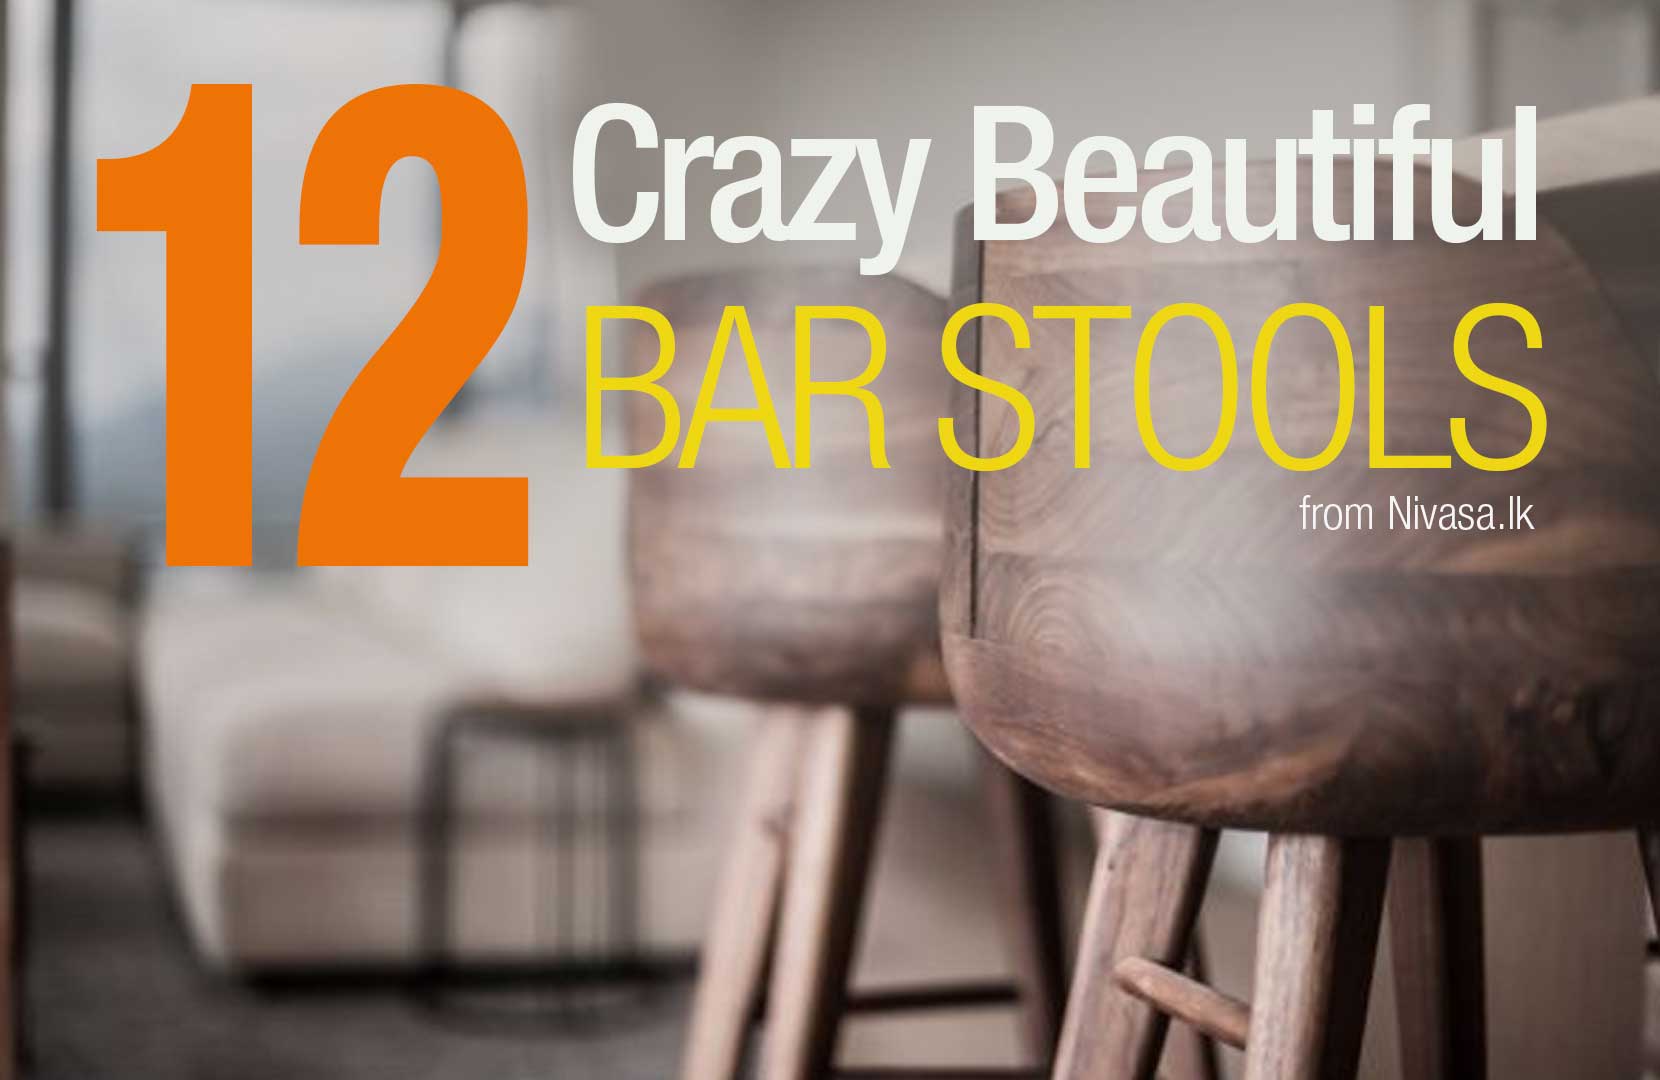 Bar Stool Ideas for your home interior design let’s see how to place them